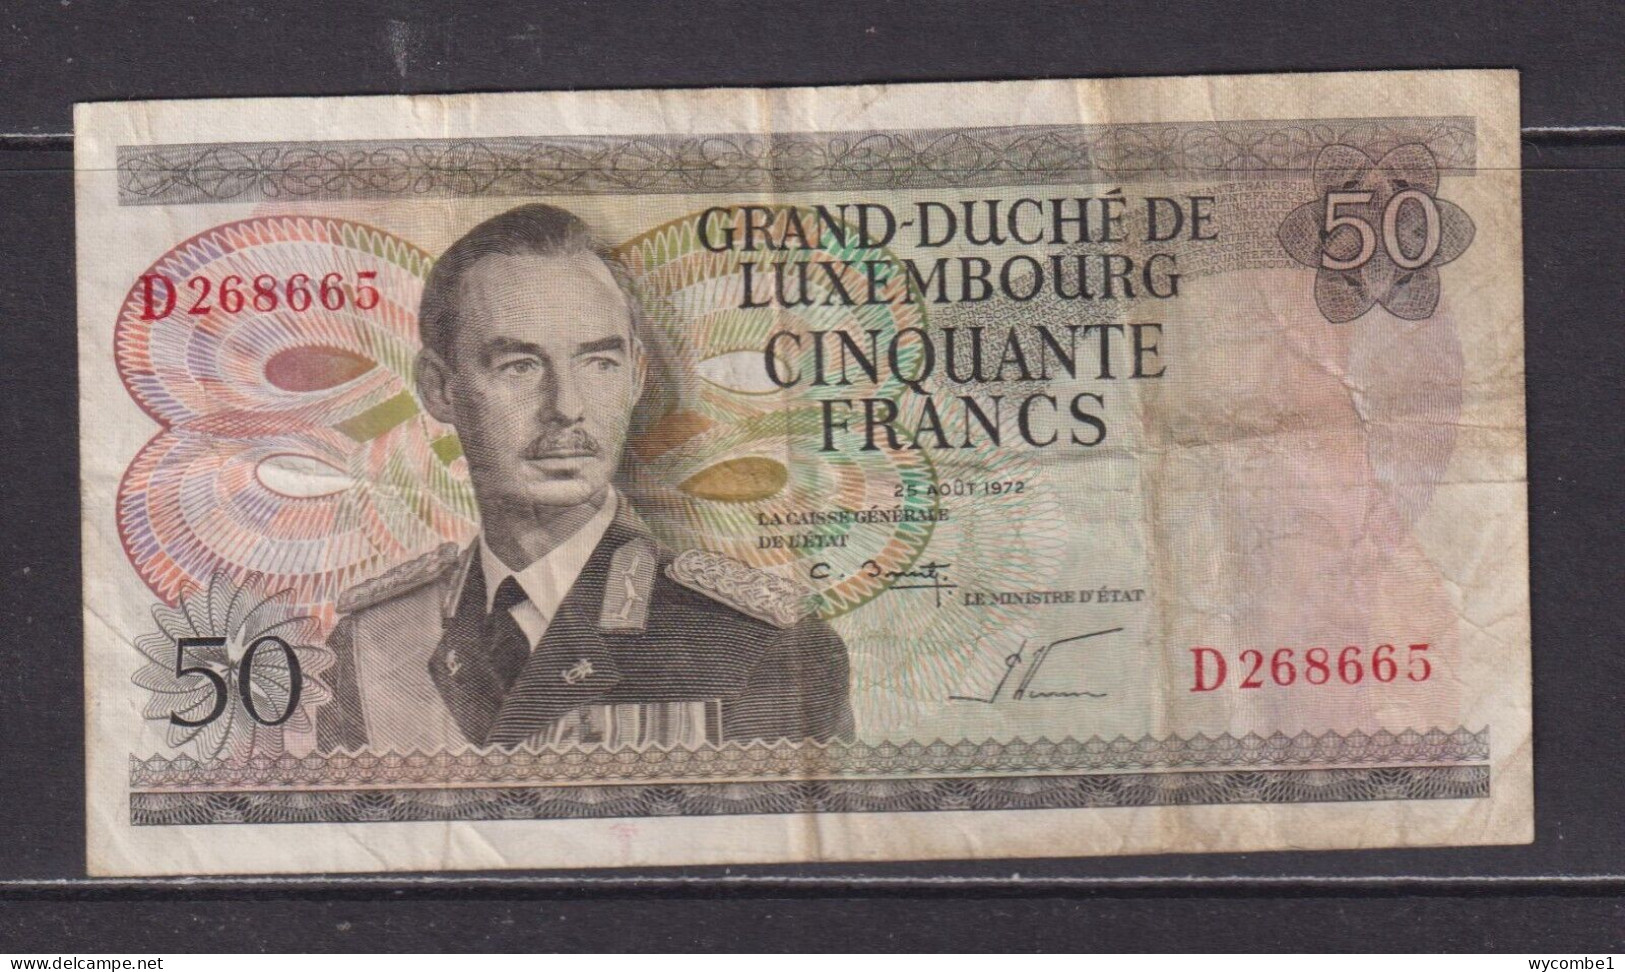 LUXEMBOURG - 1972 50 Francs Circulated Banknote - Luxemburg